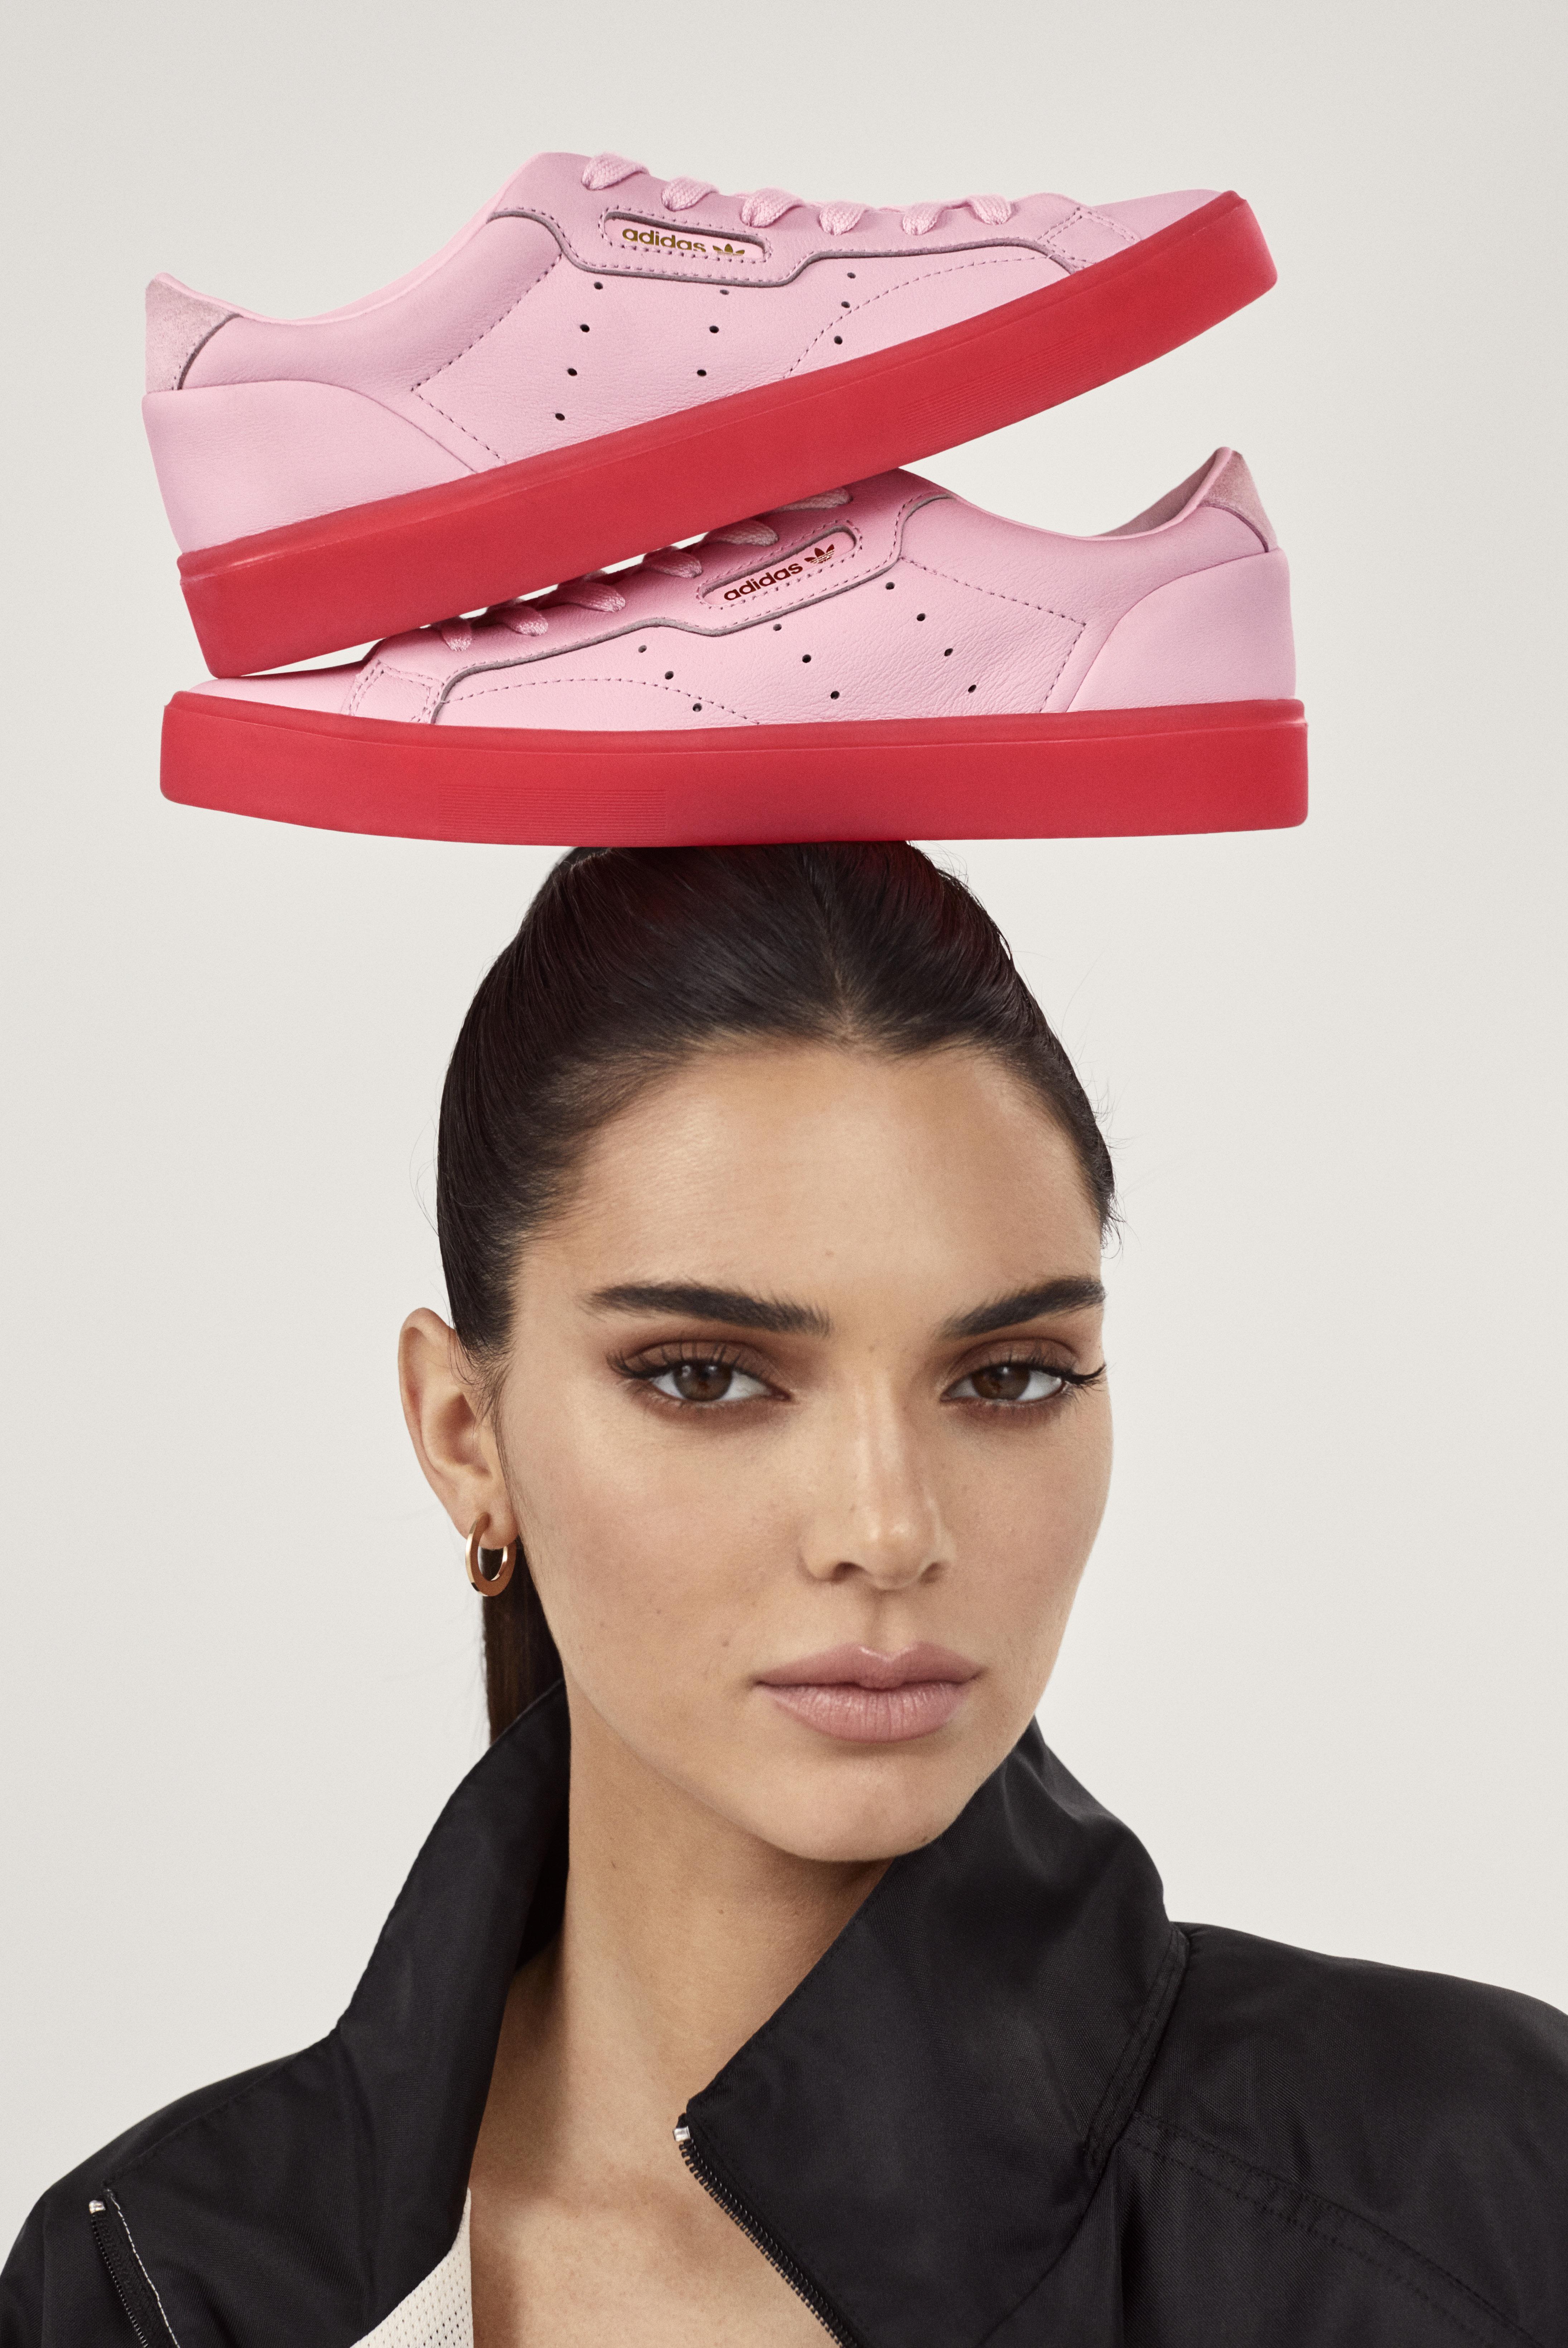 Kendall Jenner Adidas 2019 Wallpapers